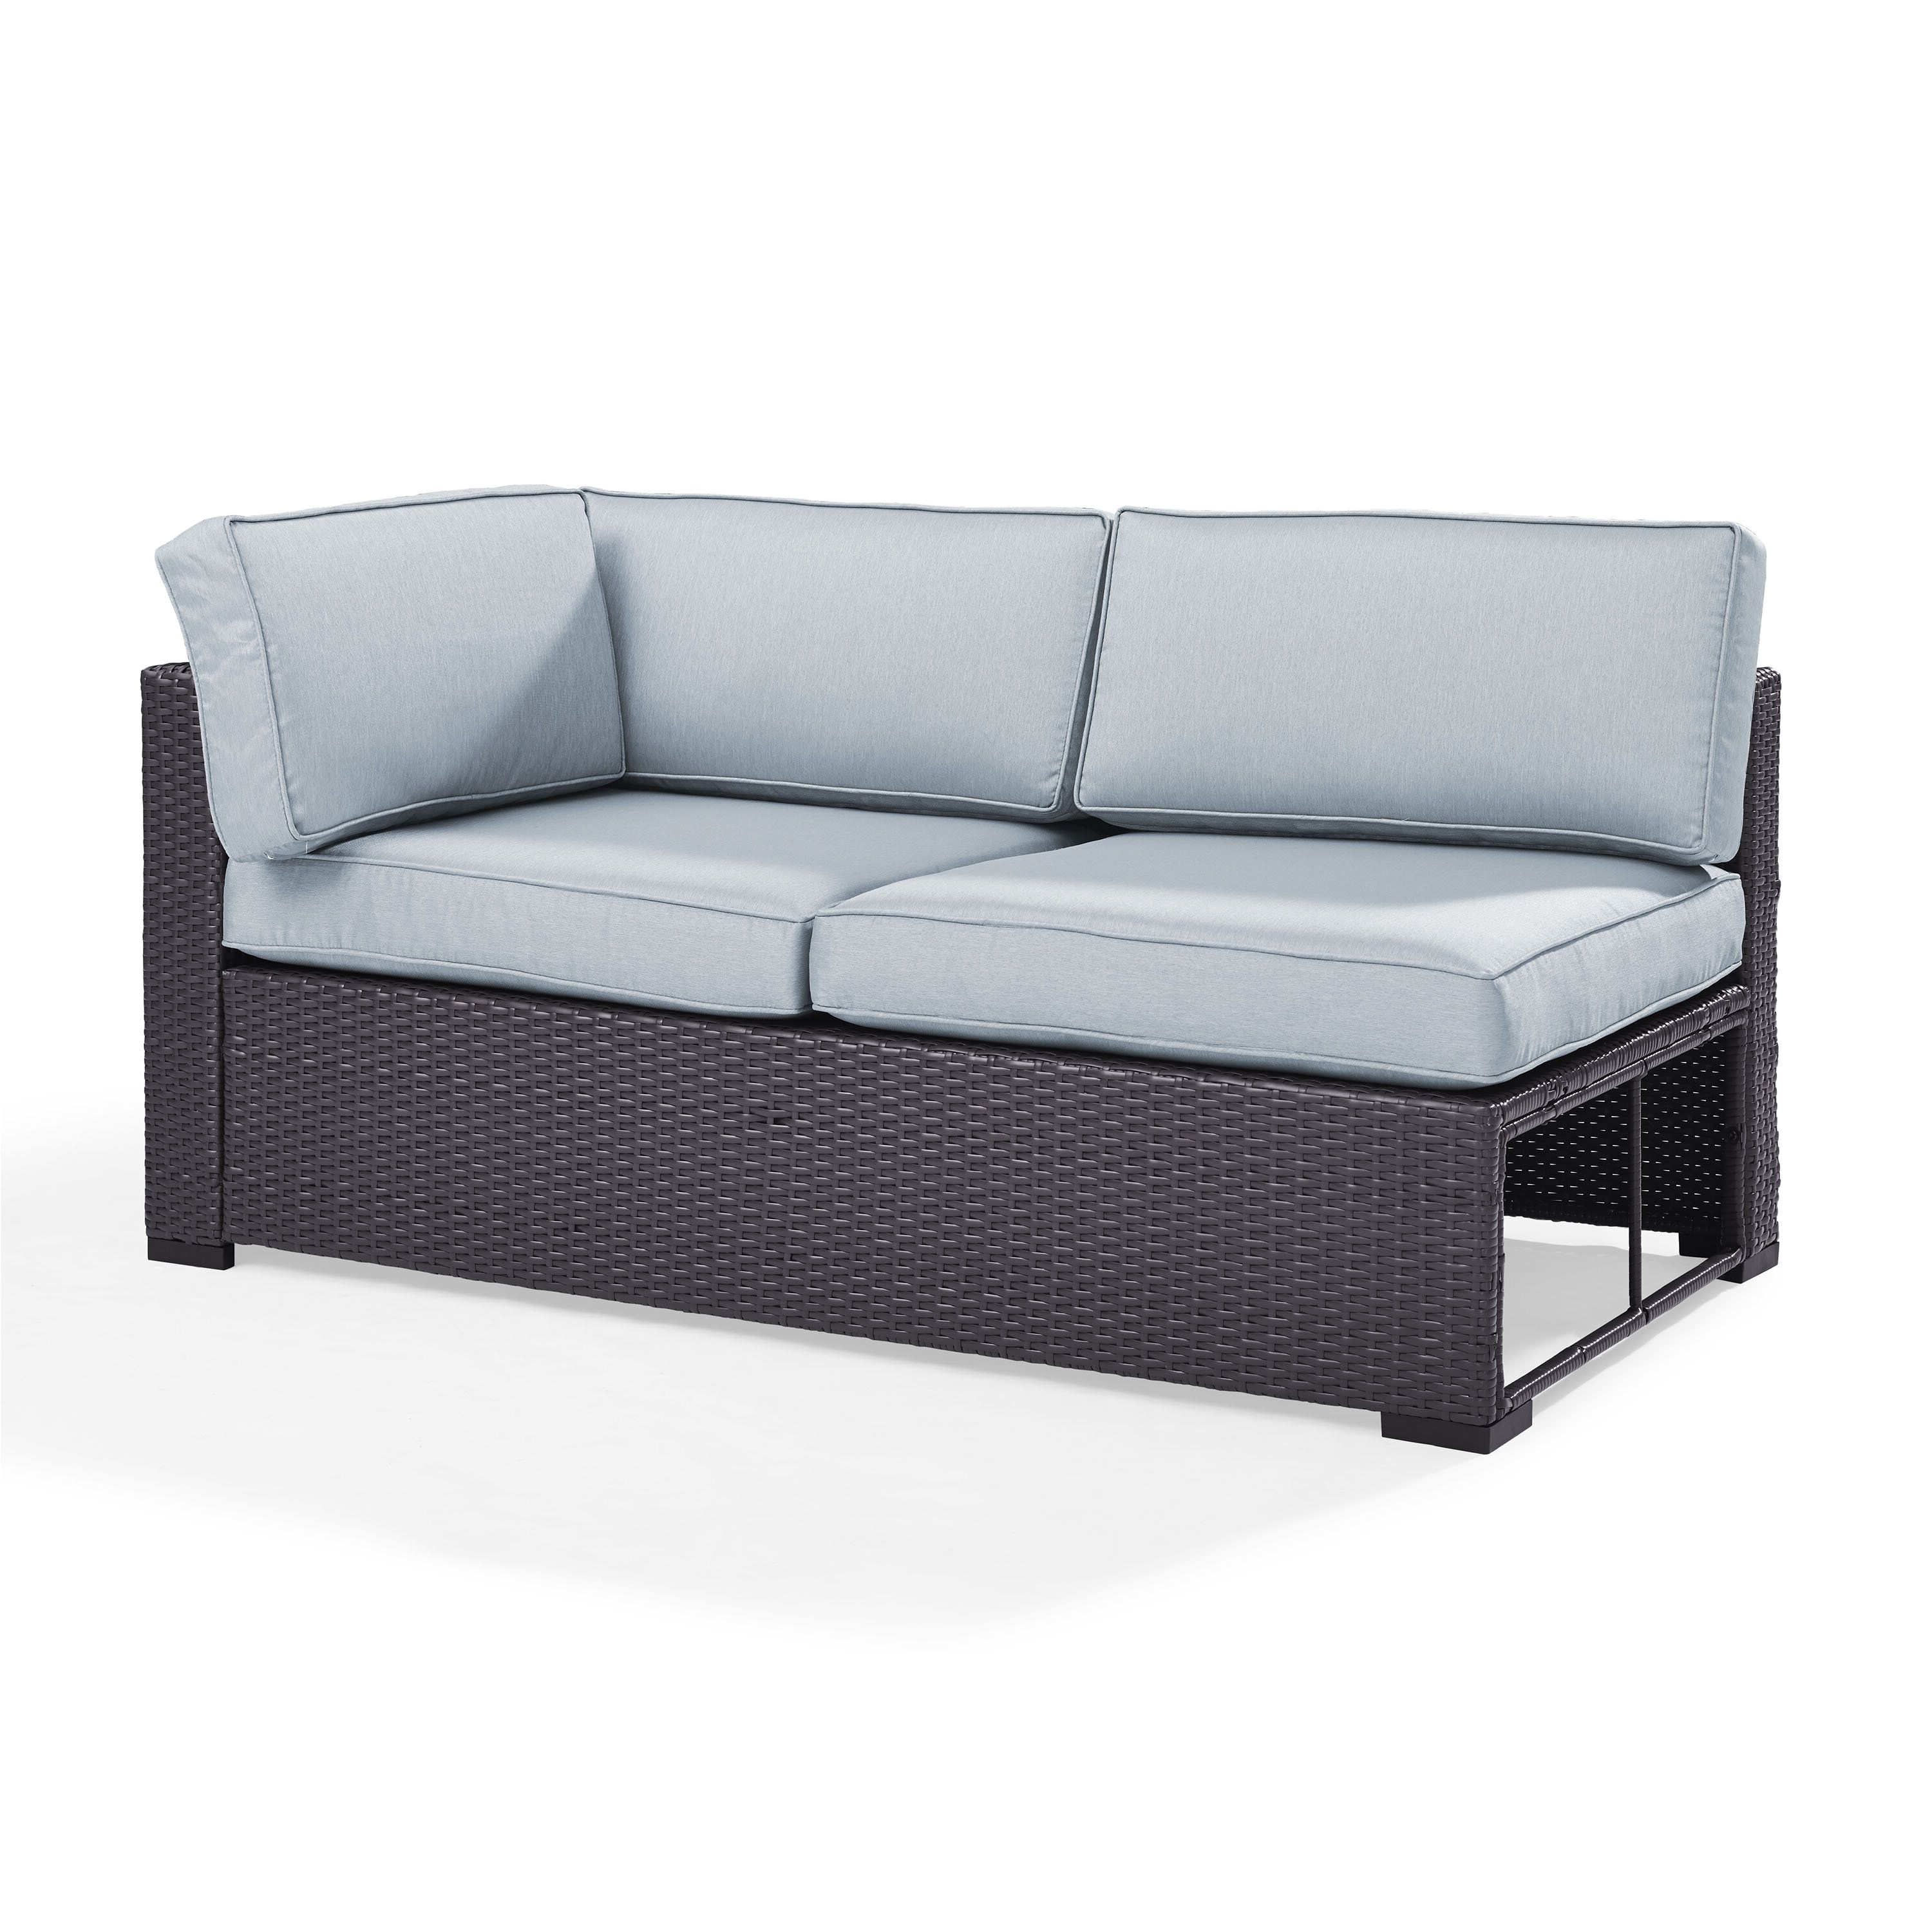 Mullenax Outdoor Loveseats With Cushions With Favorite Highland Dunes Dinah Loveseat With Cushions (View 15 of 20)